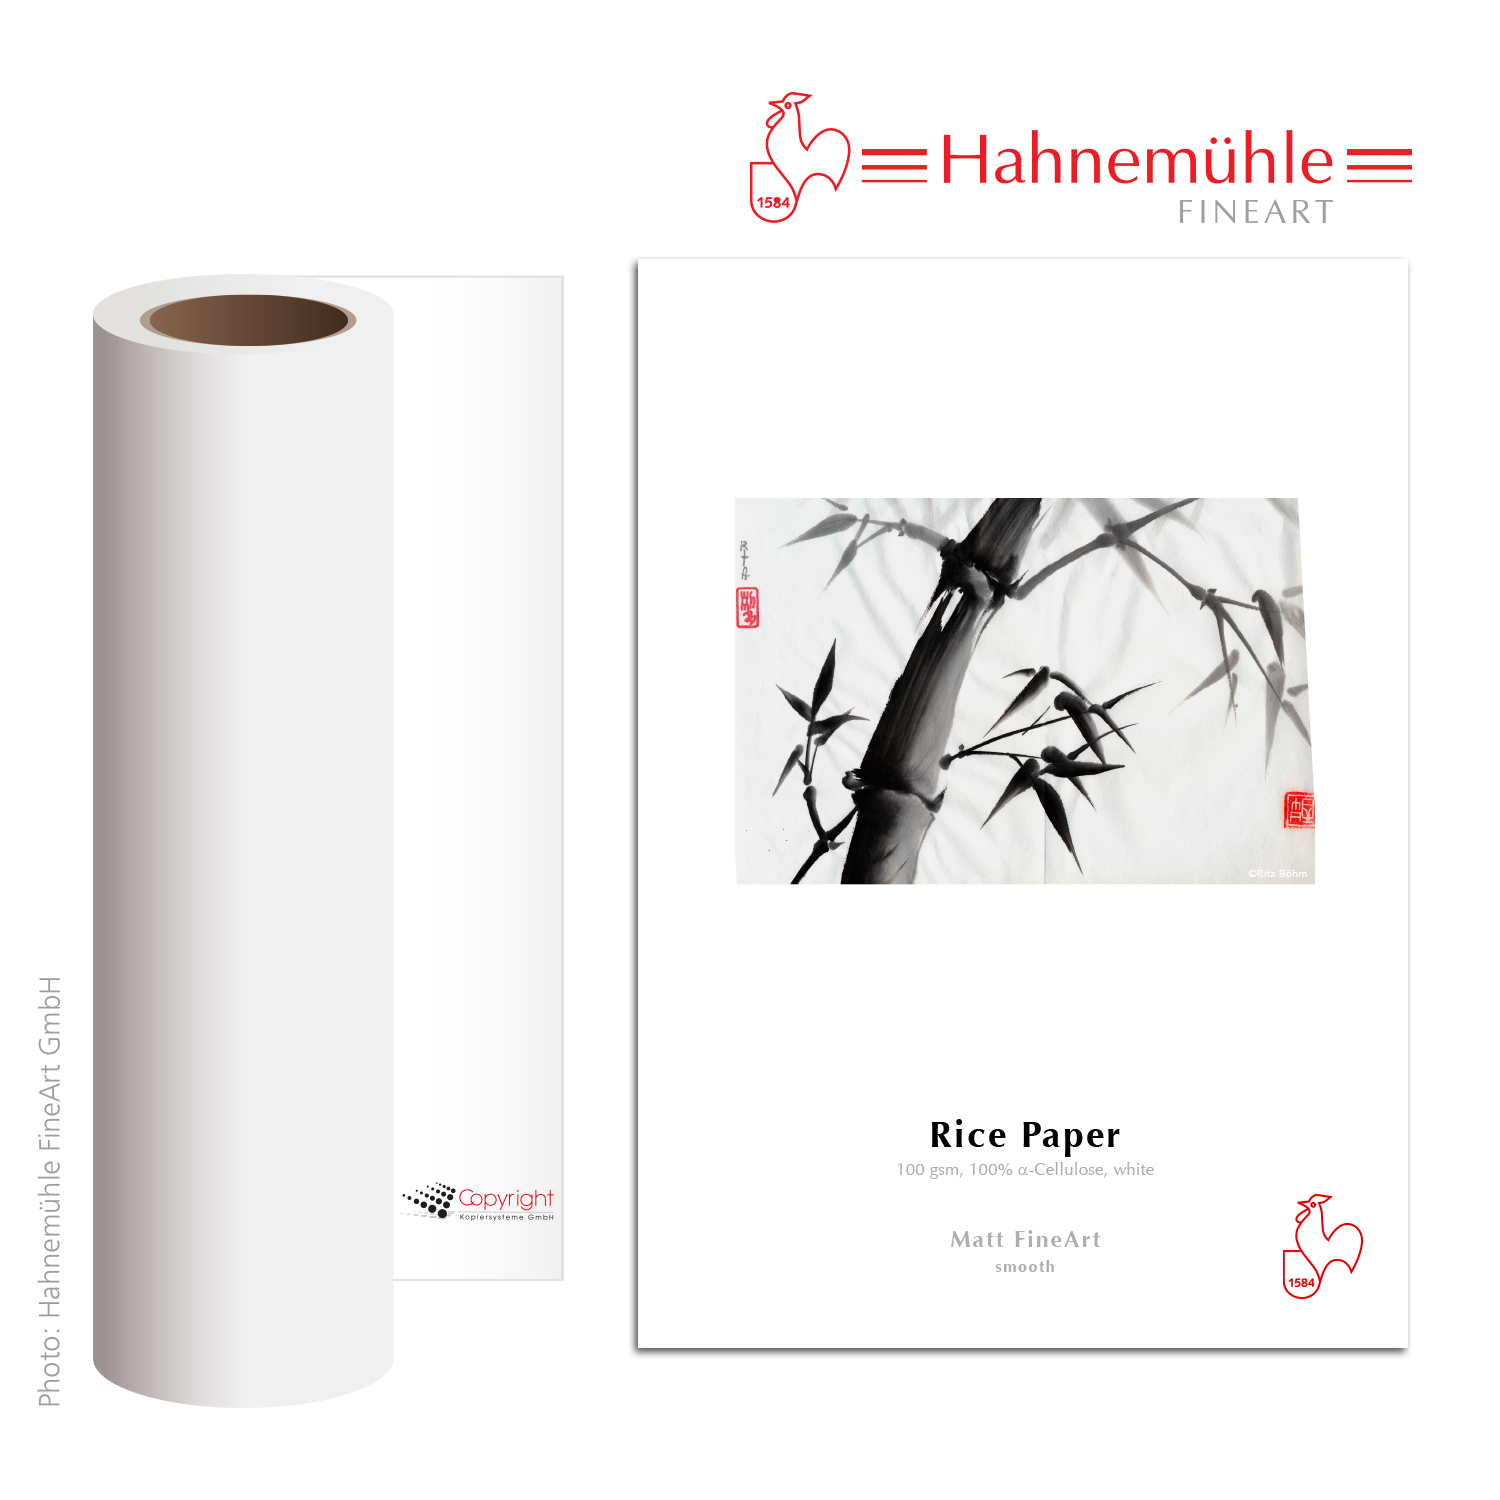 Hahnemühle Rice Paper